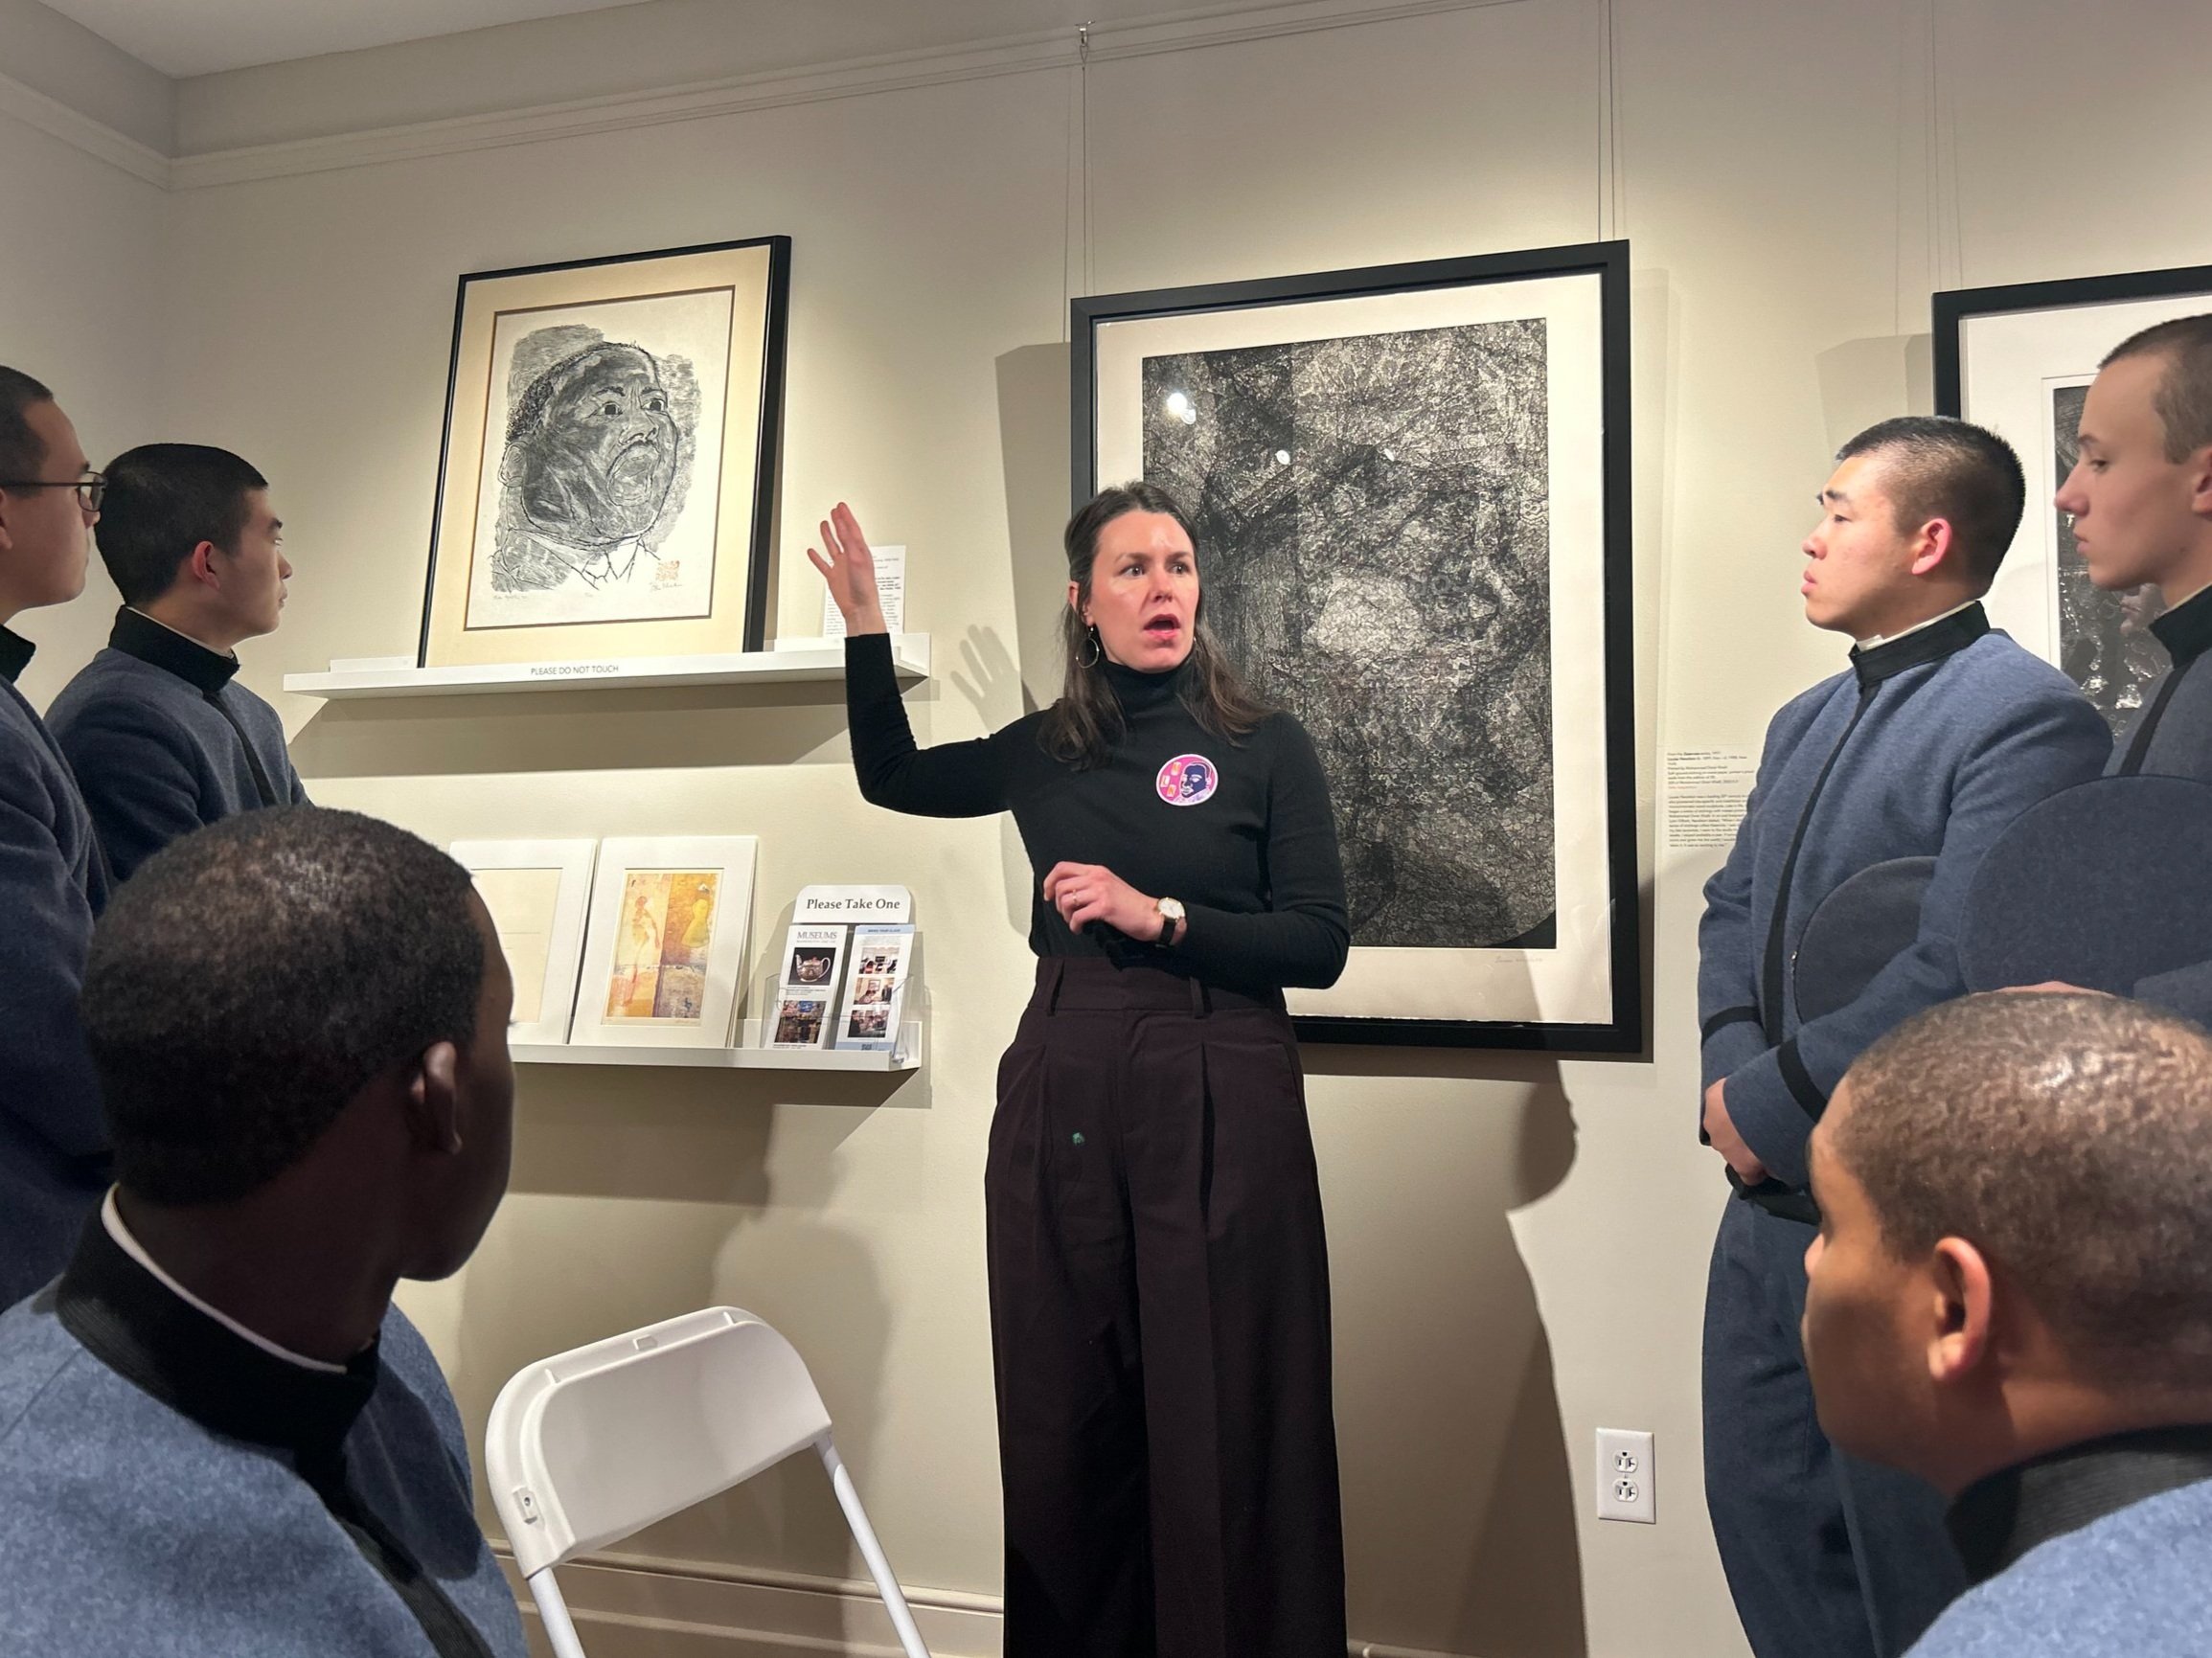  VMI cadets watch Curator Elizabeth Spear describe a famous MLK print on display in Reeves. Source:  The Spectator  